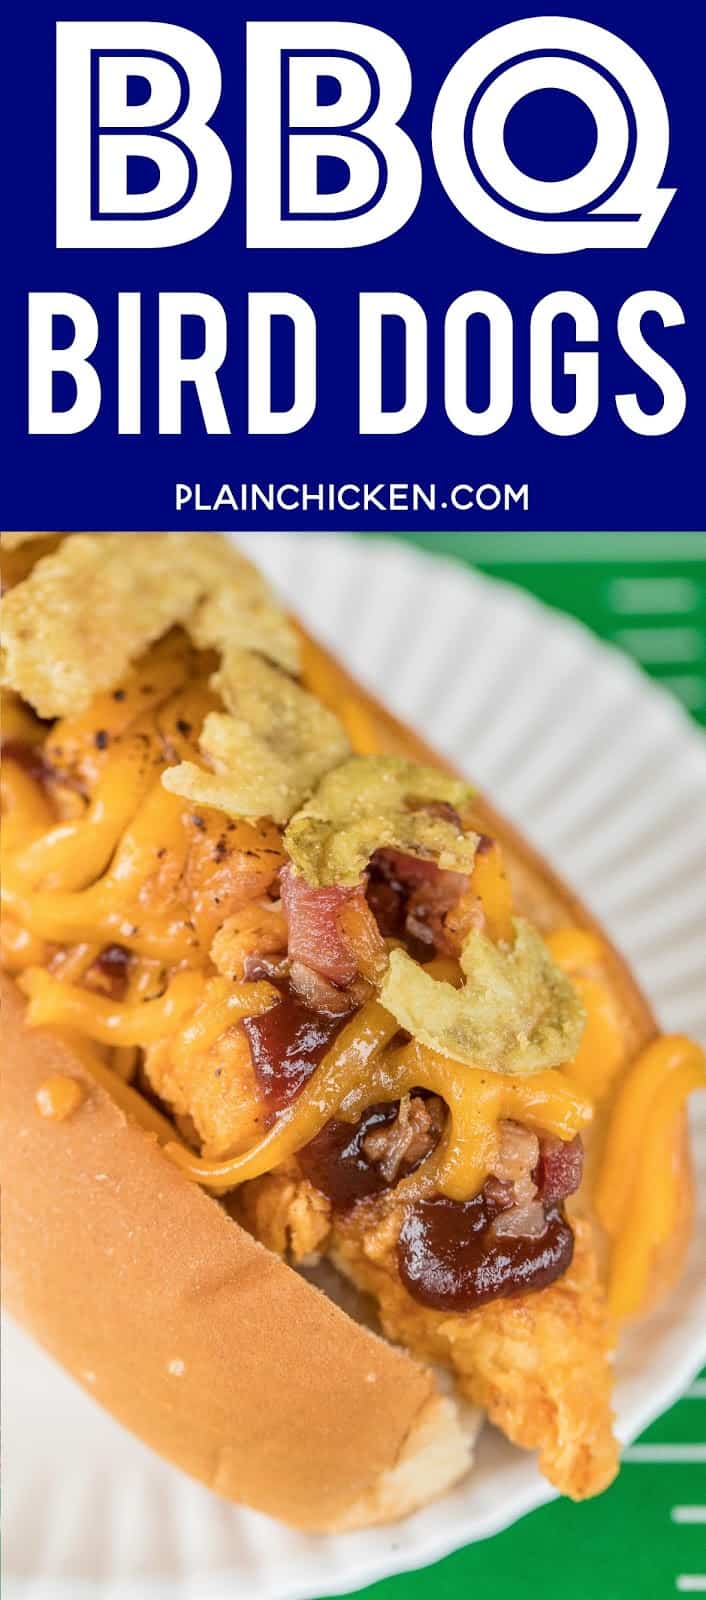 BBQ Bird Dogs  - chicken fingers, bacon, cheese, BBQ sauce and fried jalapeños - perfect tailgating food! Easy to assemble in the parking lot! We also love to eat these for a quick lunch or dinner. #chicken #tailgatingrecipe #easychickenrecipe #chickenrecipe #chickenfingers #bbq